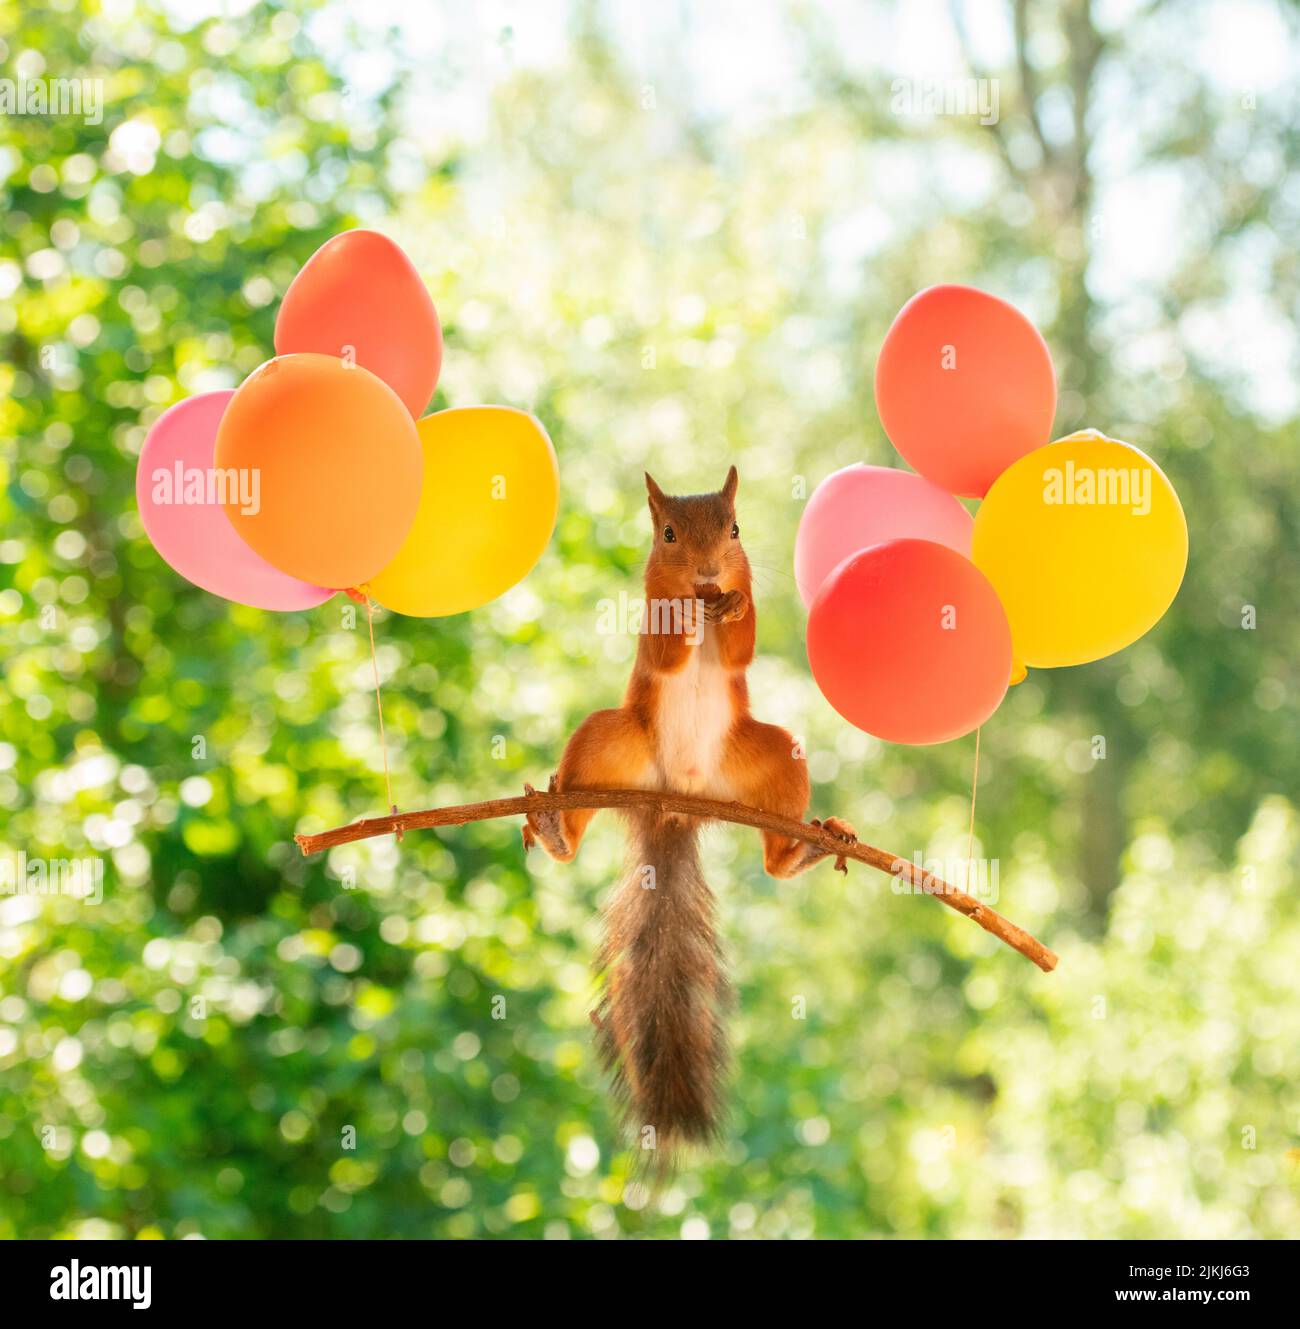 Red Squirrel in the air with balloons Stock Photo